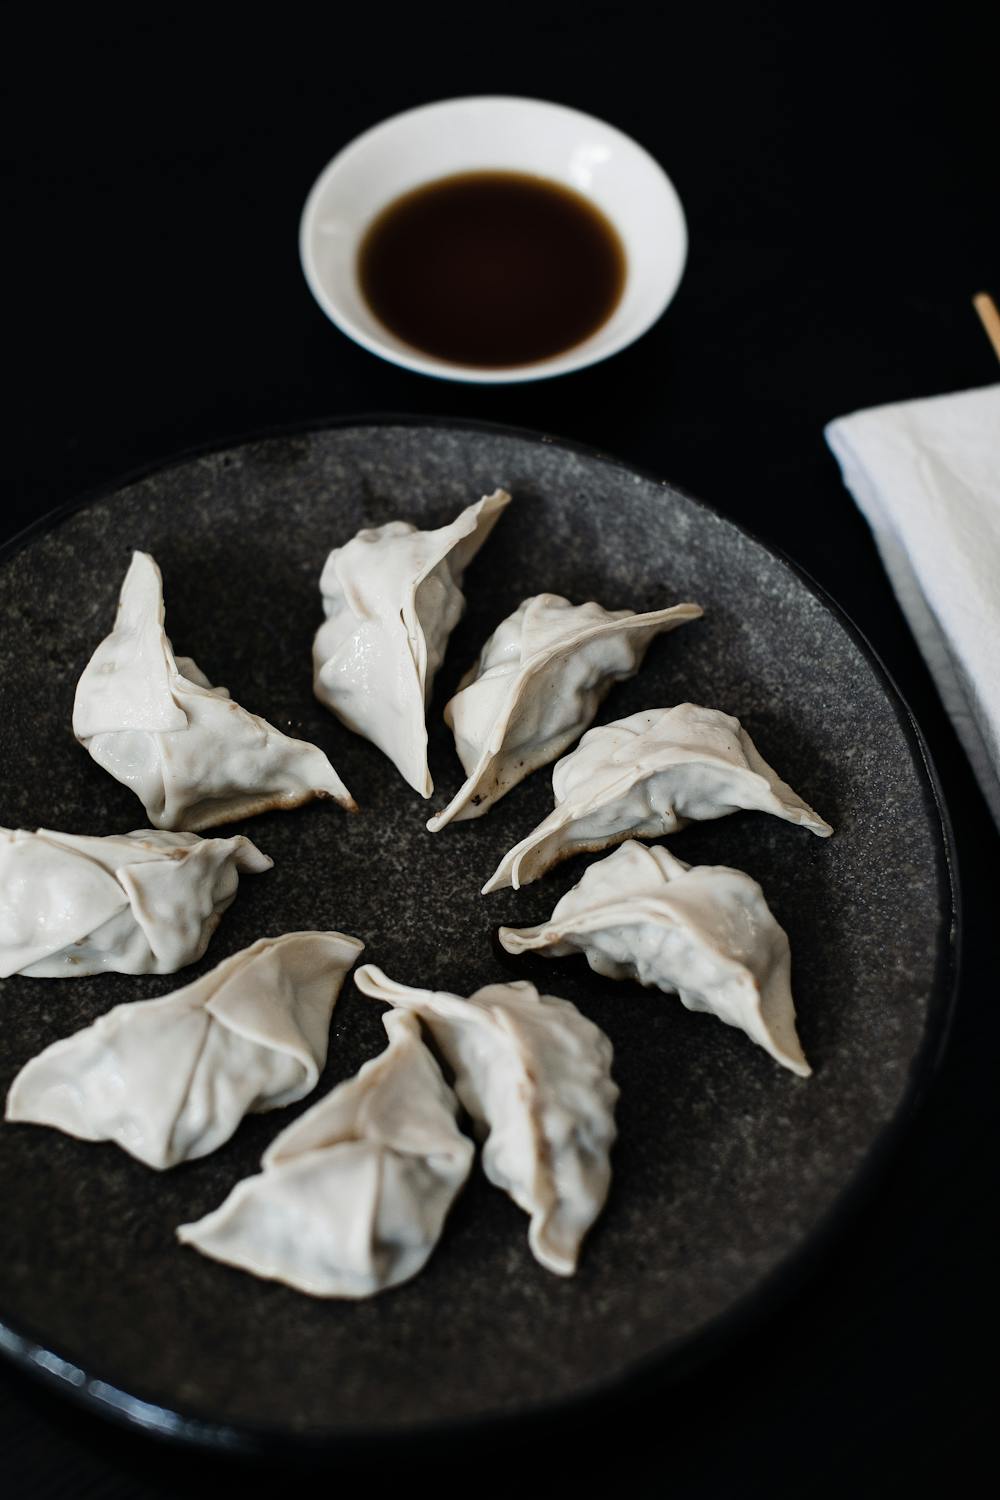 Plate with Japanese dumplings on table · Free Stock Photo